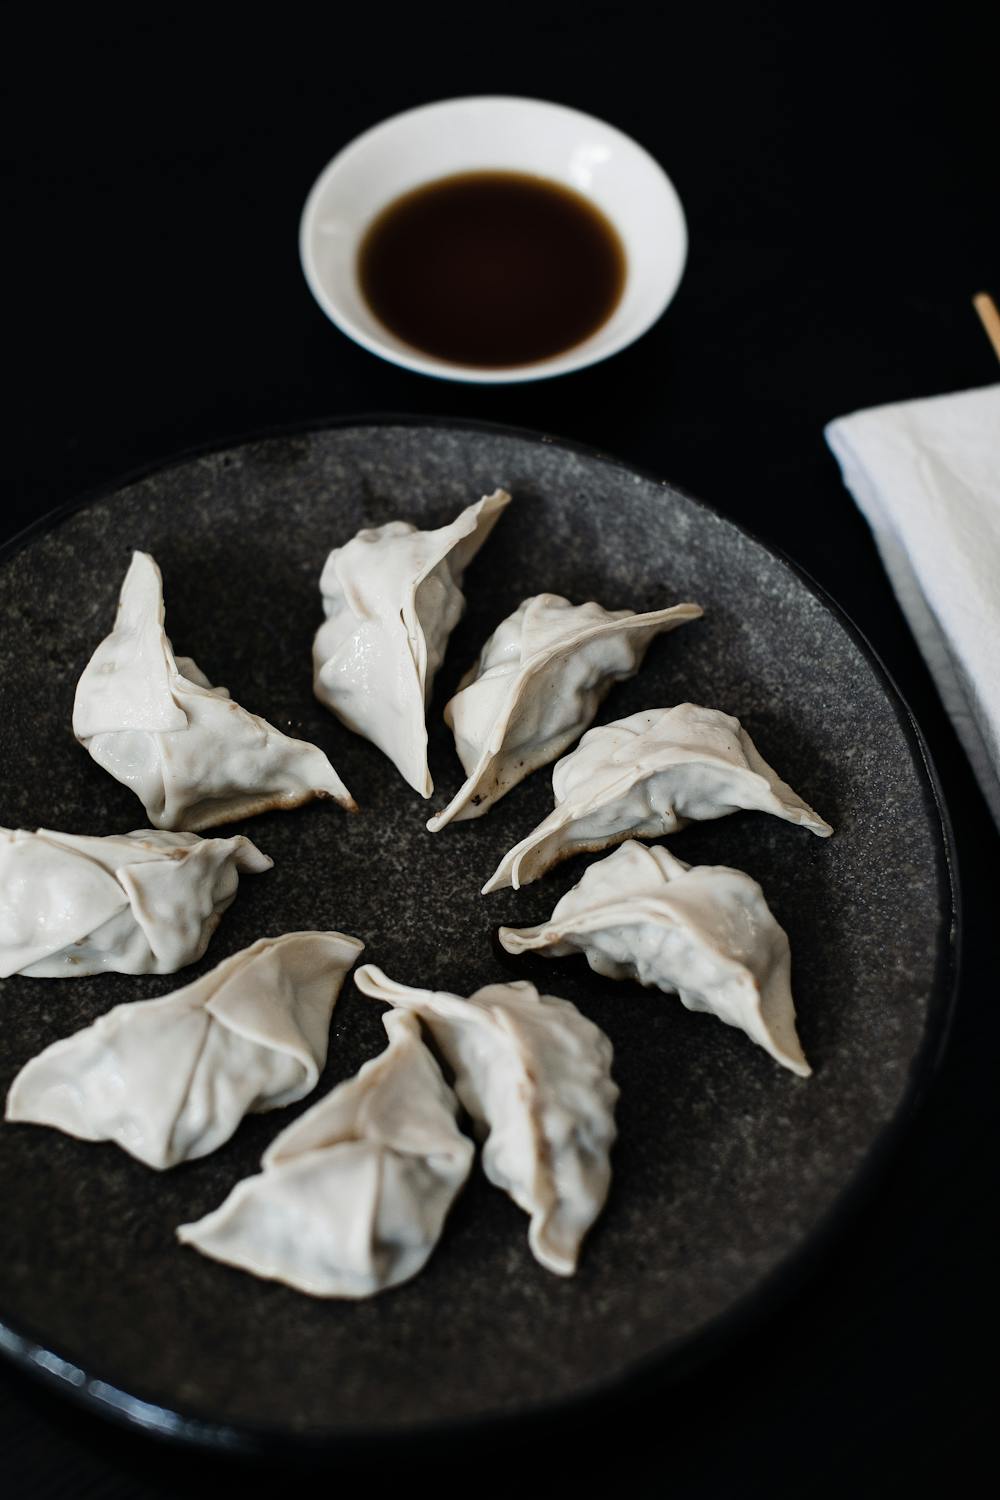 Plate with Japanese dumplings on table · Free Stock Photo